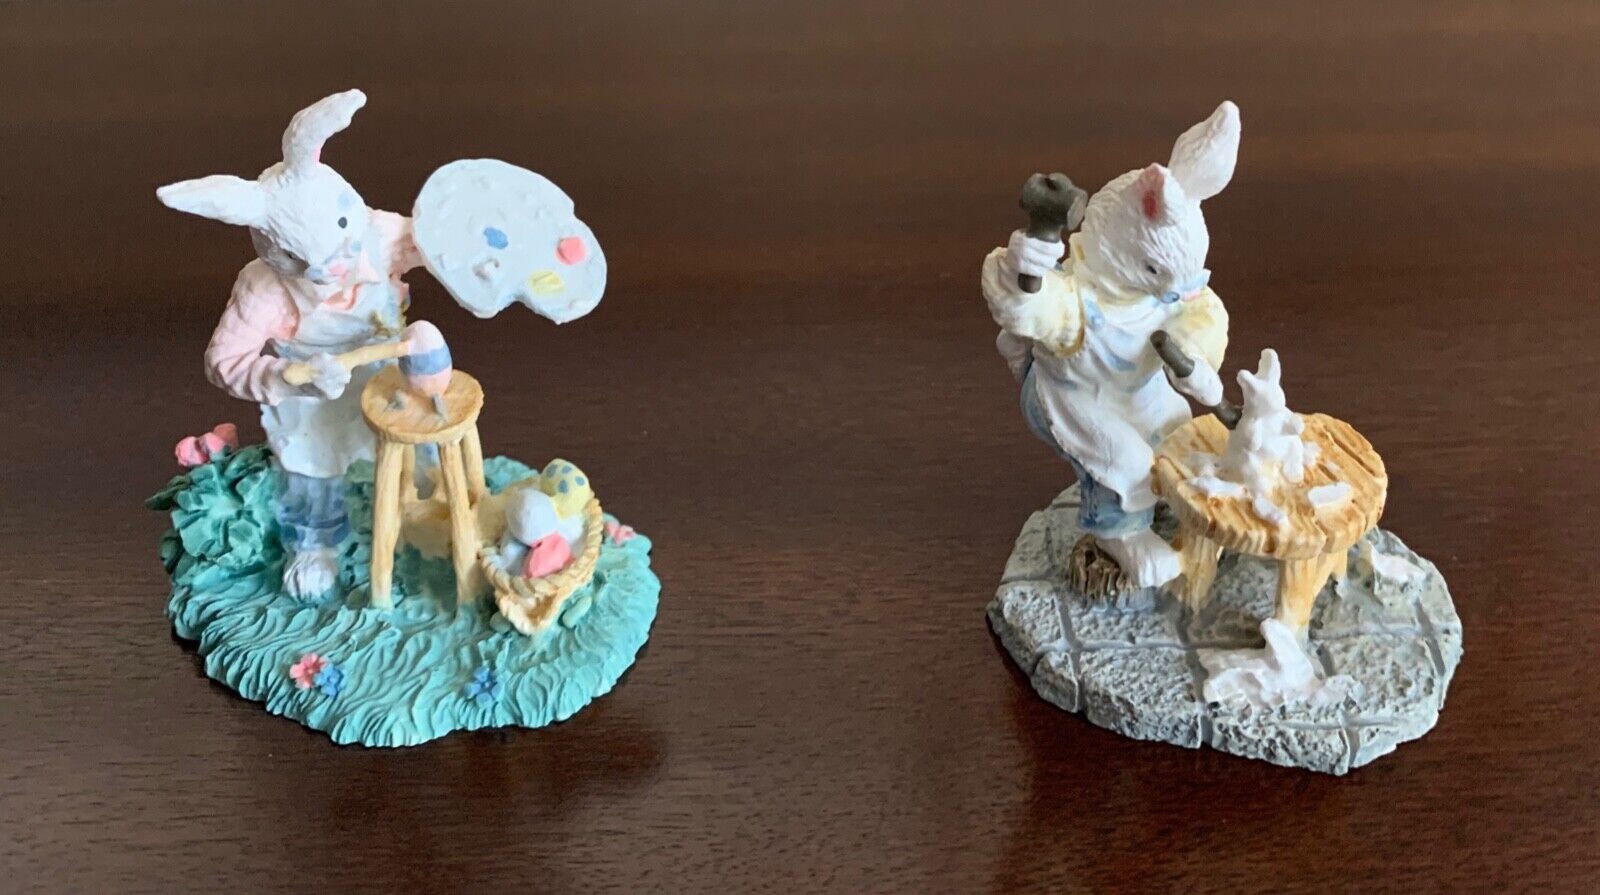 2 Midwest Easter Bunny Figurines ~ Bunny Egg Painter and Bunny Sculptor